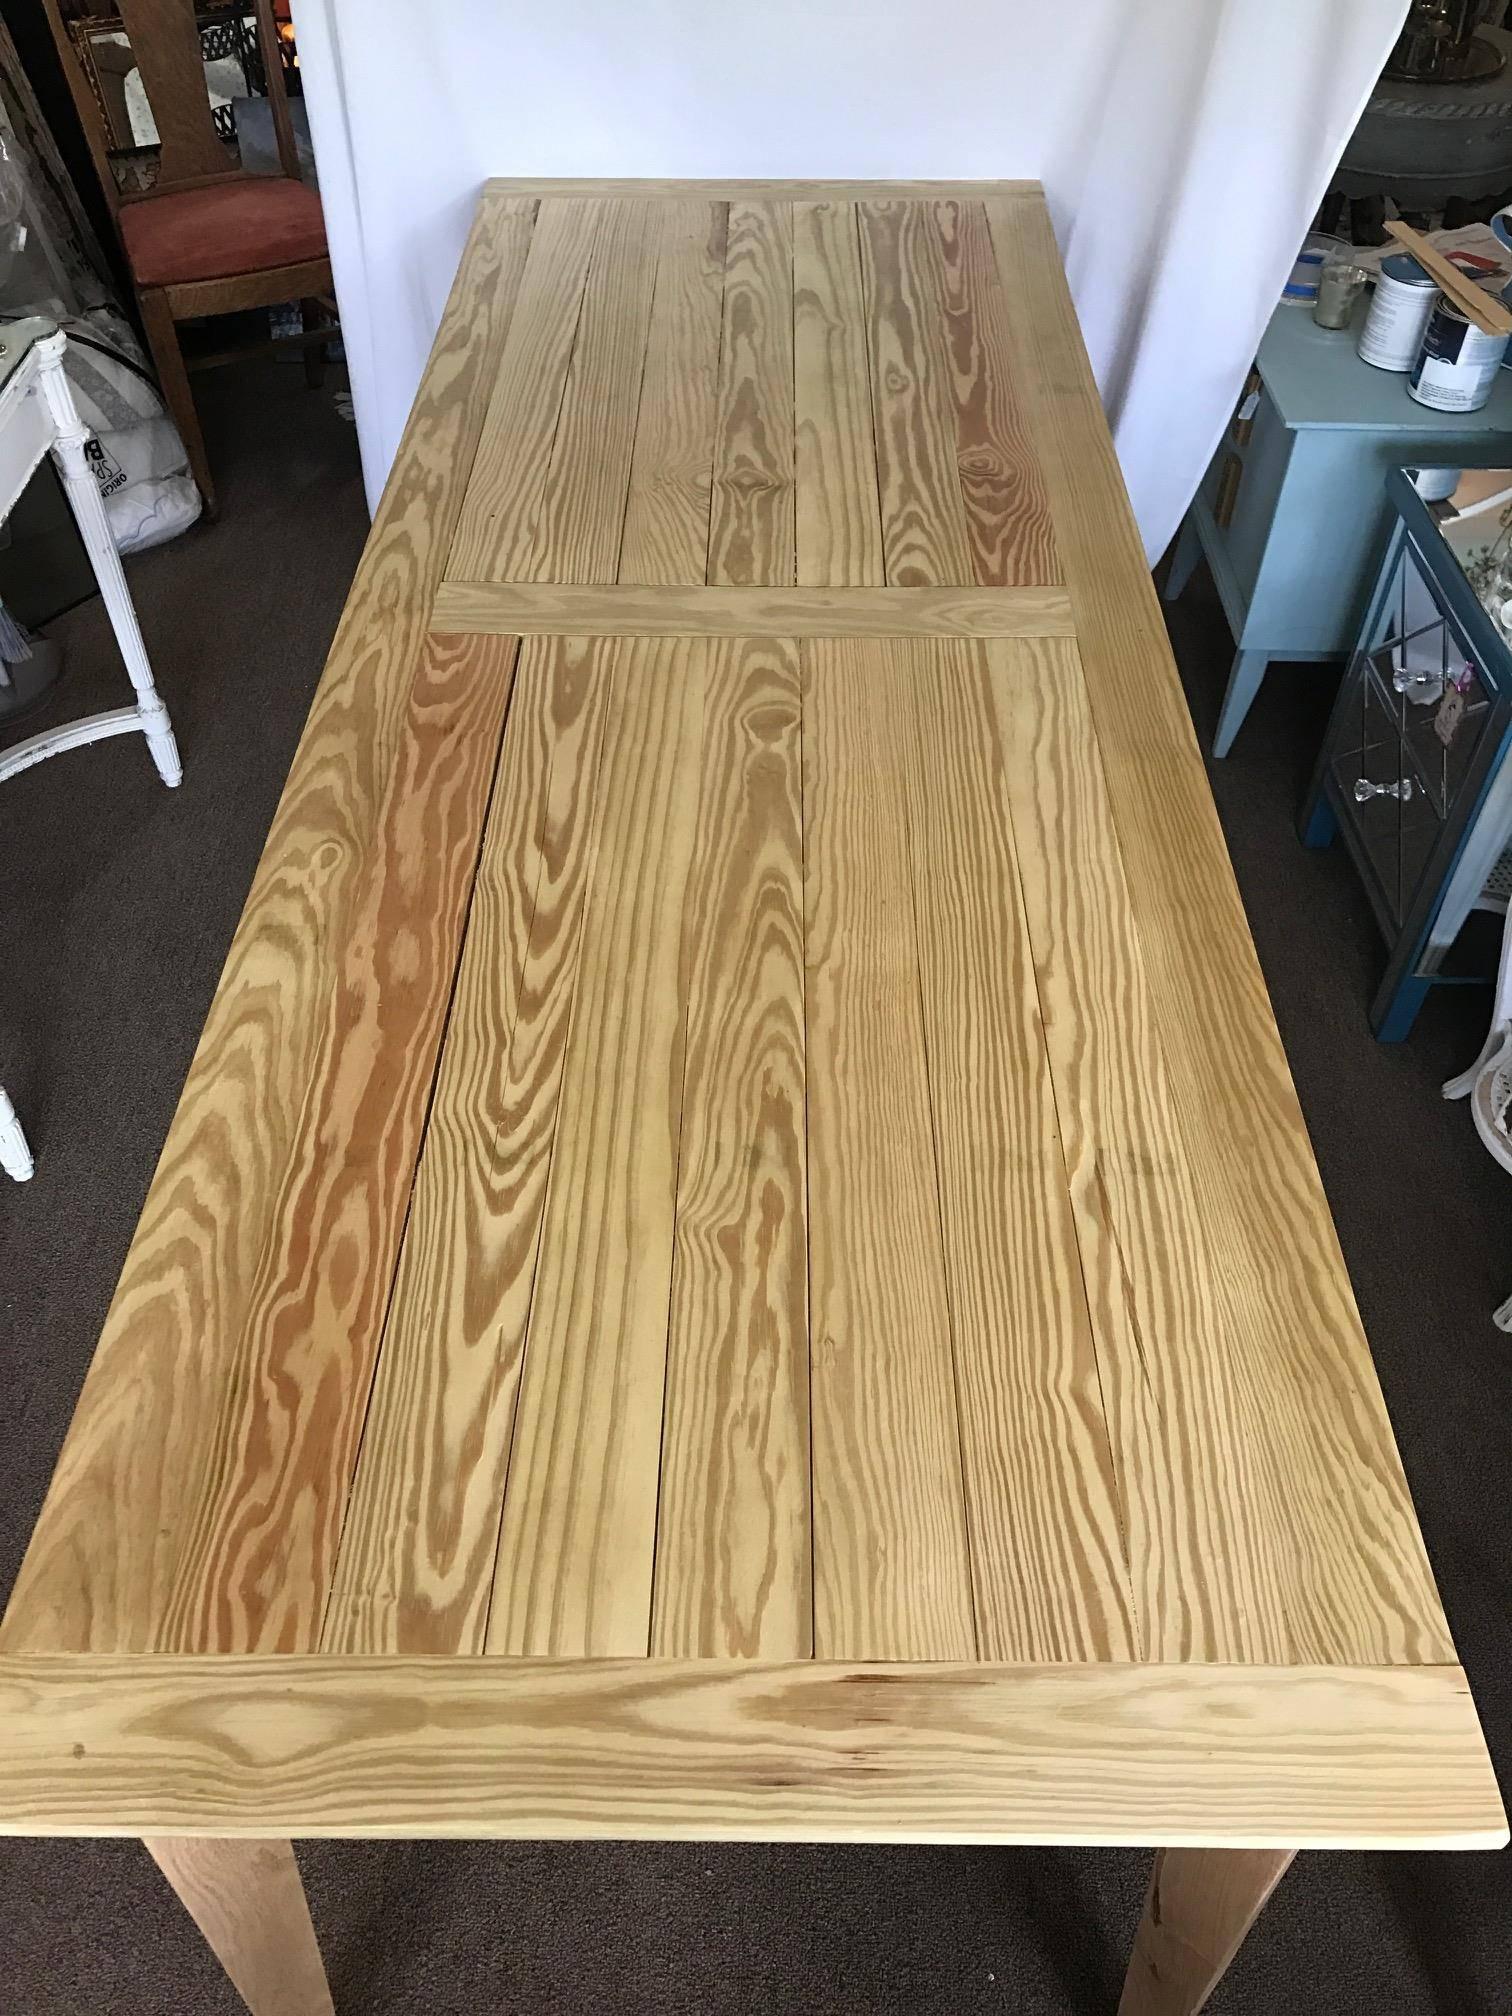 Fabulous! 8 foot farm table custom handmade treated spar grade finish table. Douglas fir top and oak legs. Sturdy and ready for some fun times. Interior or exterior. This fabulous French farm table seats ten plus!
Custom, handmade by the skillful